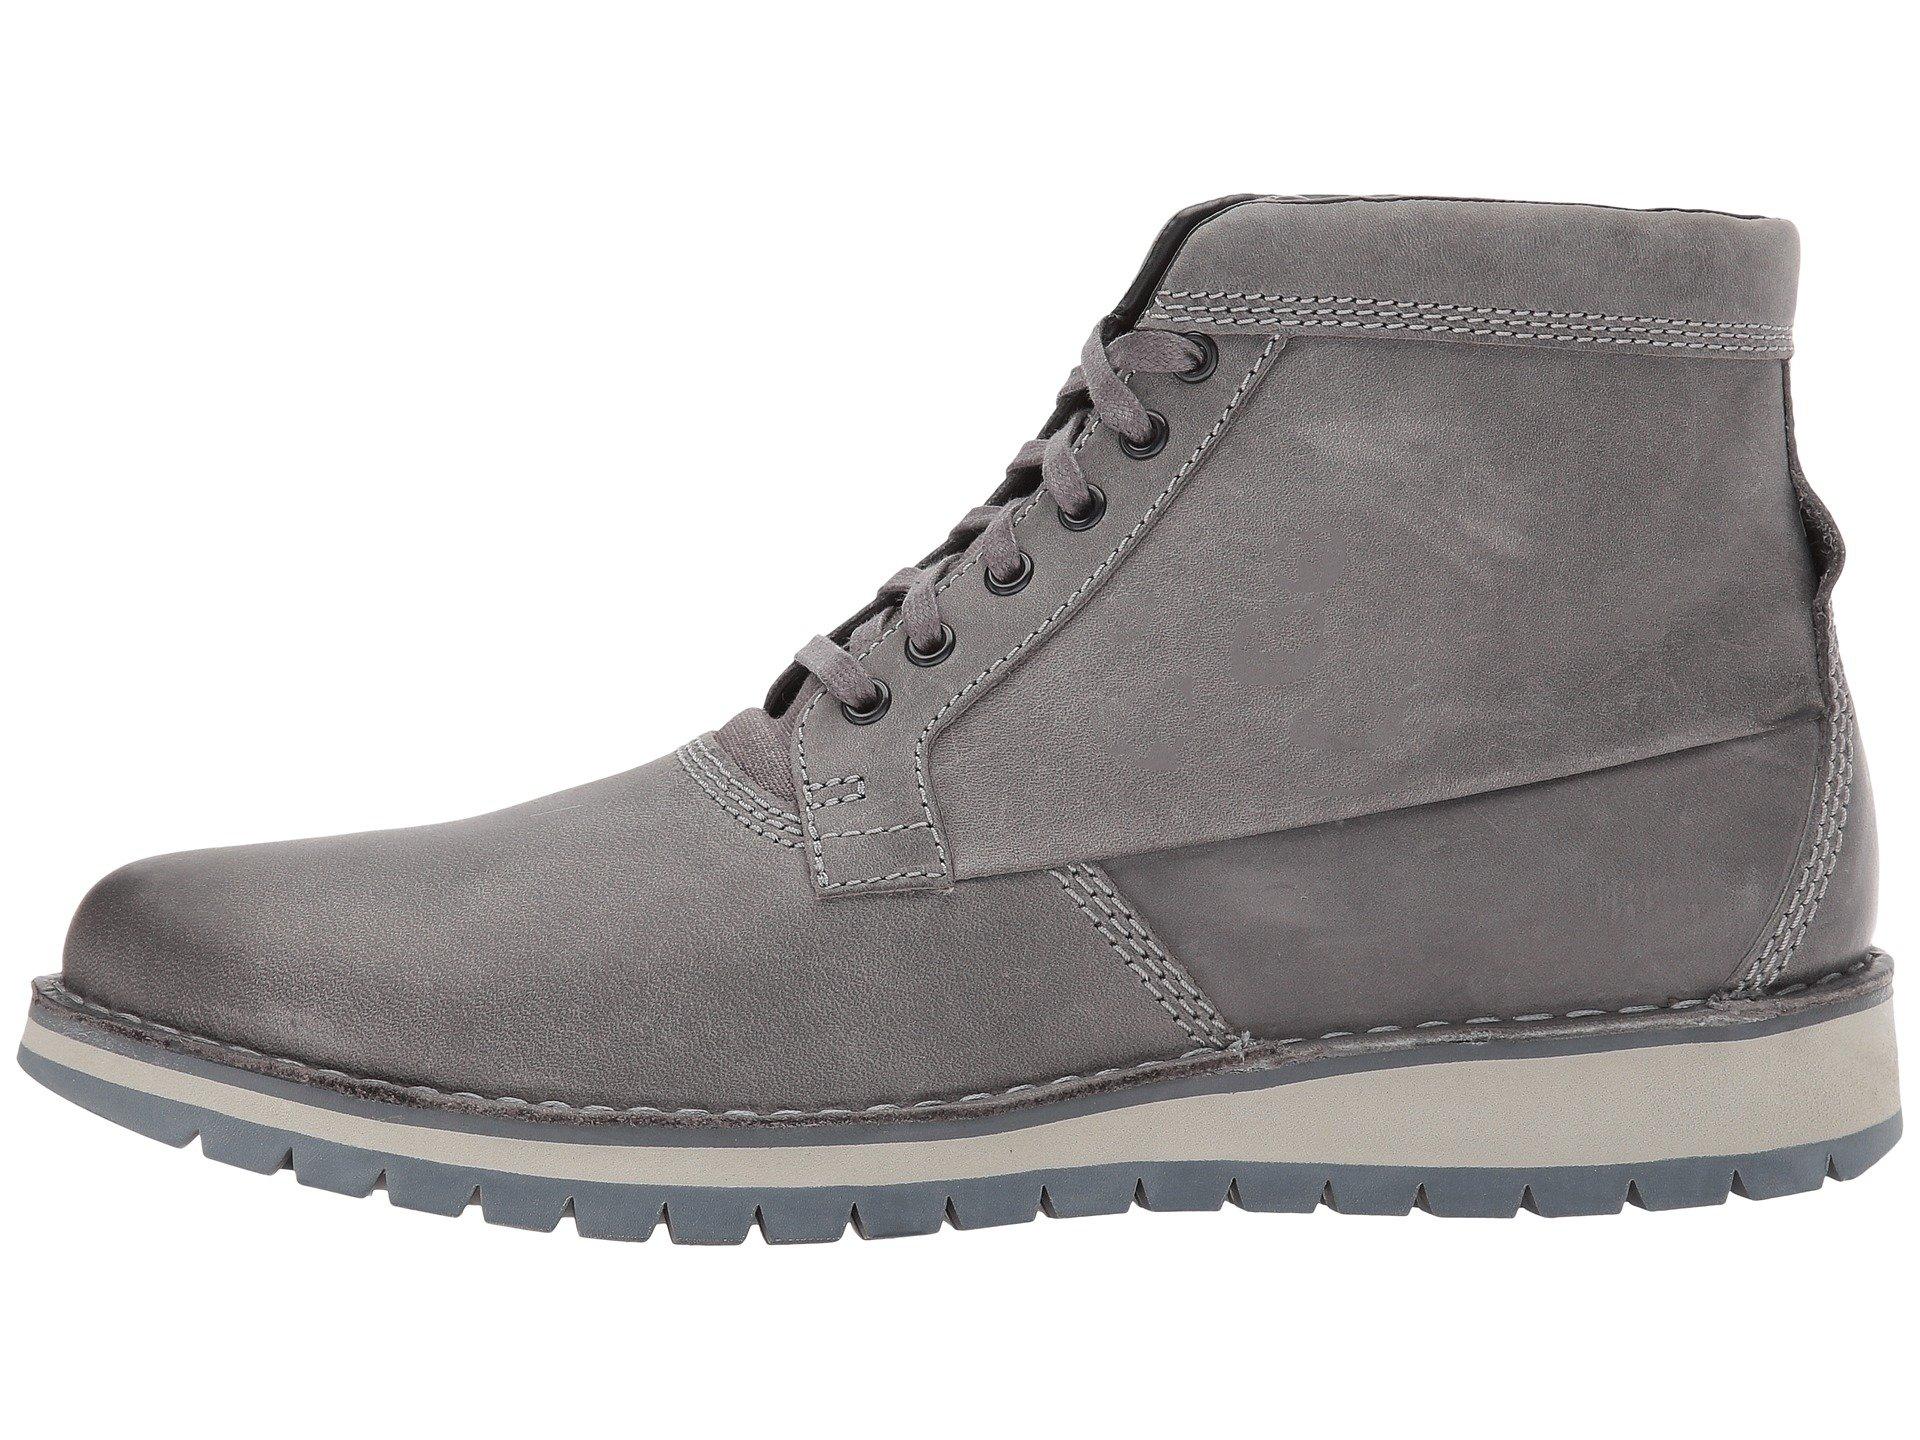 clarks varby boot